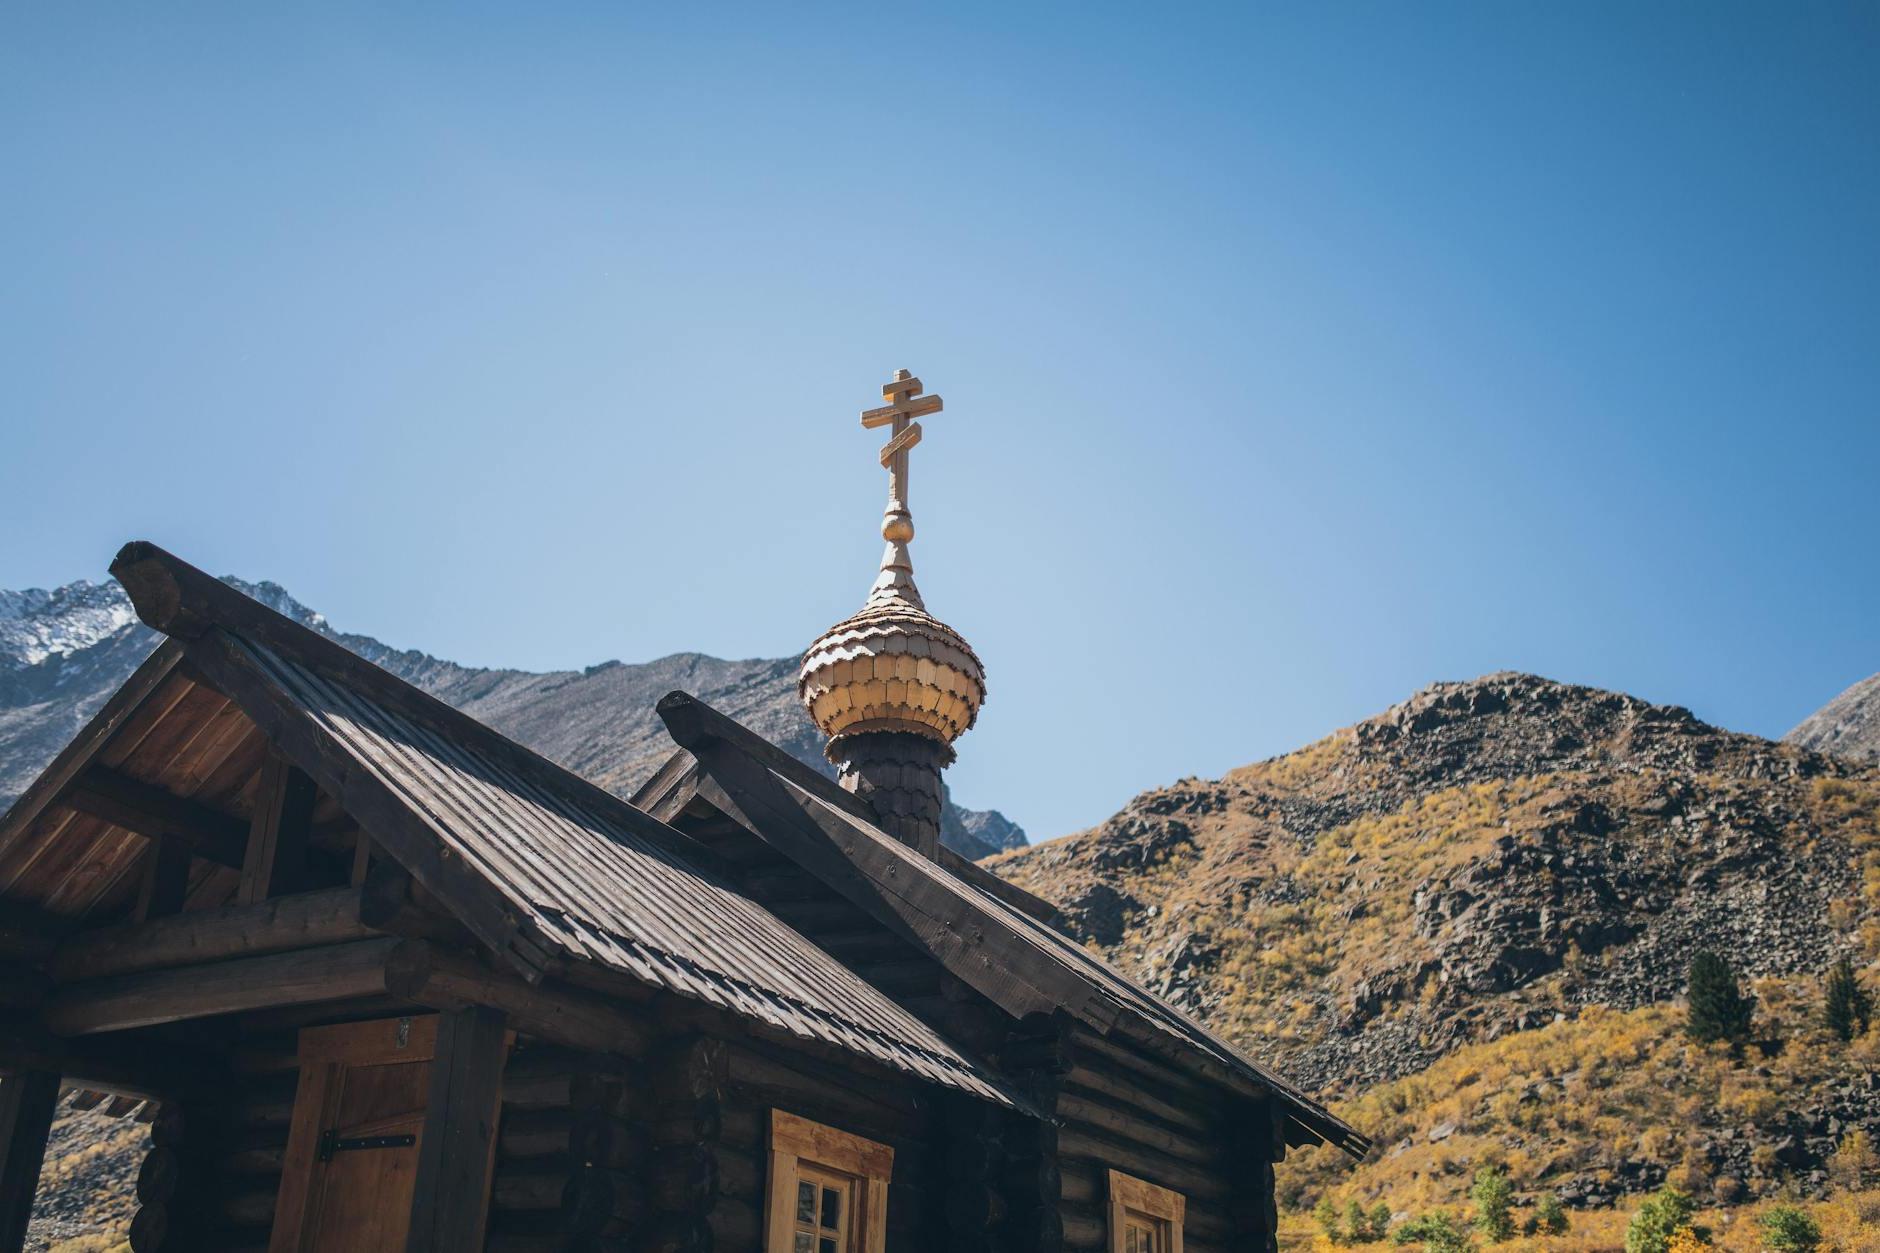 Low angle of aged wooden church located in mountainous valley against cloudless blue sky